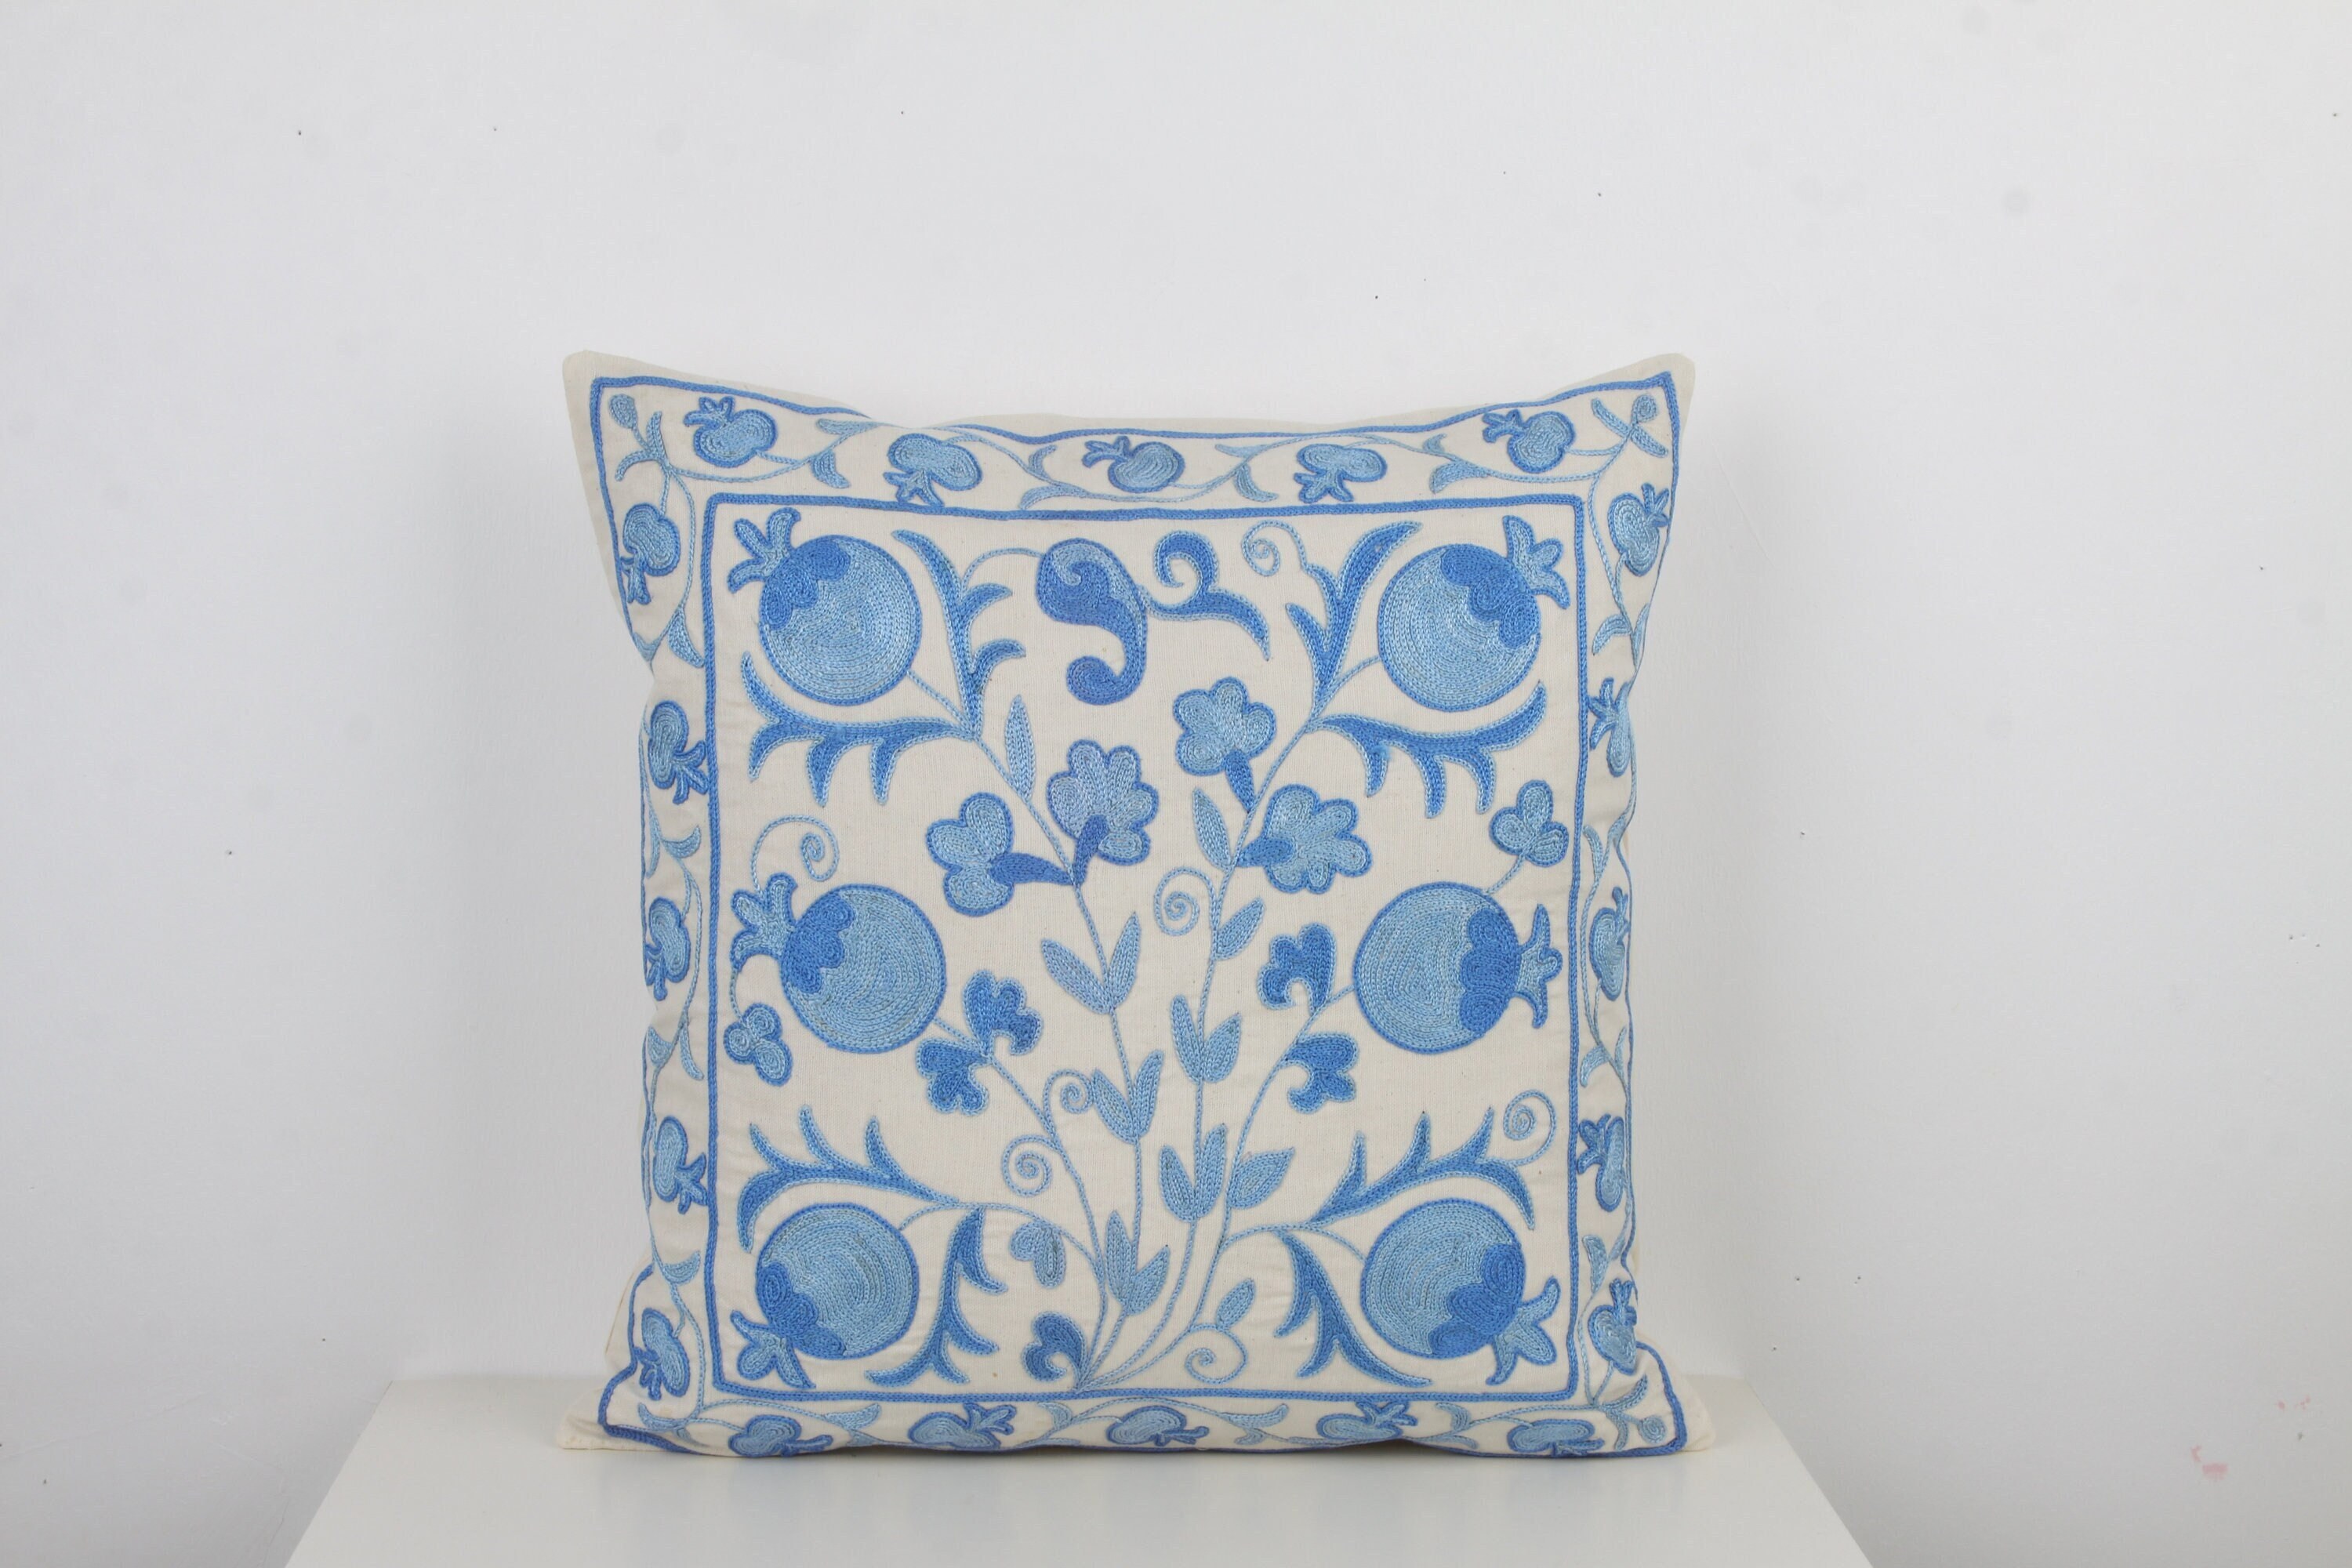 Eclectic Pillow Silk Zippered Cushion Cover Lumbar Home Decoration Embroidered Suzani Pillowcase Bohemian Blue White 18x18 45x45cm